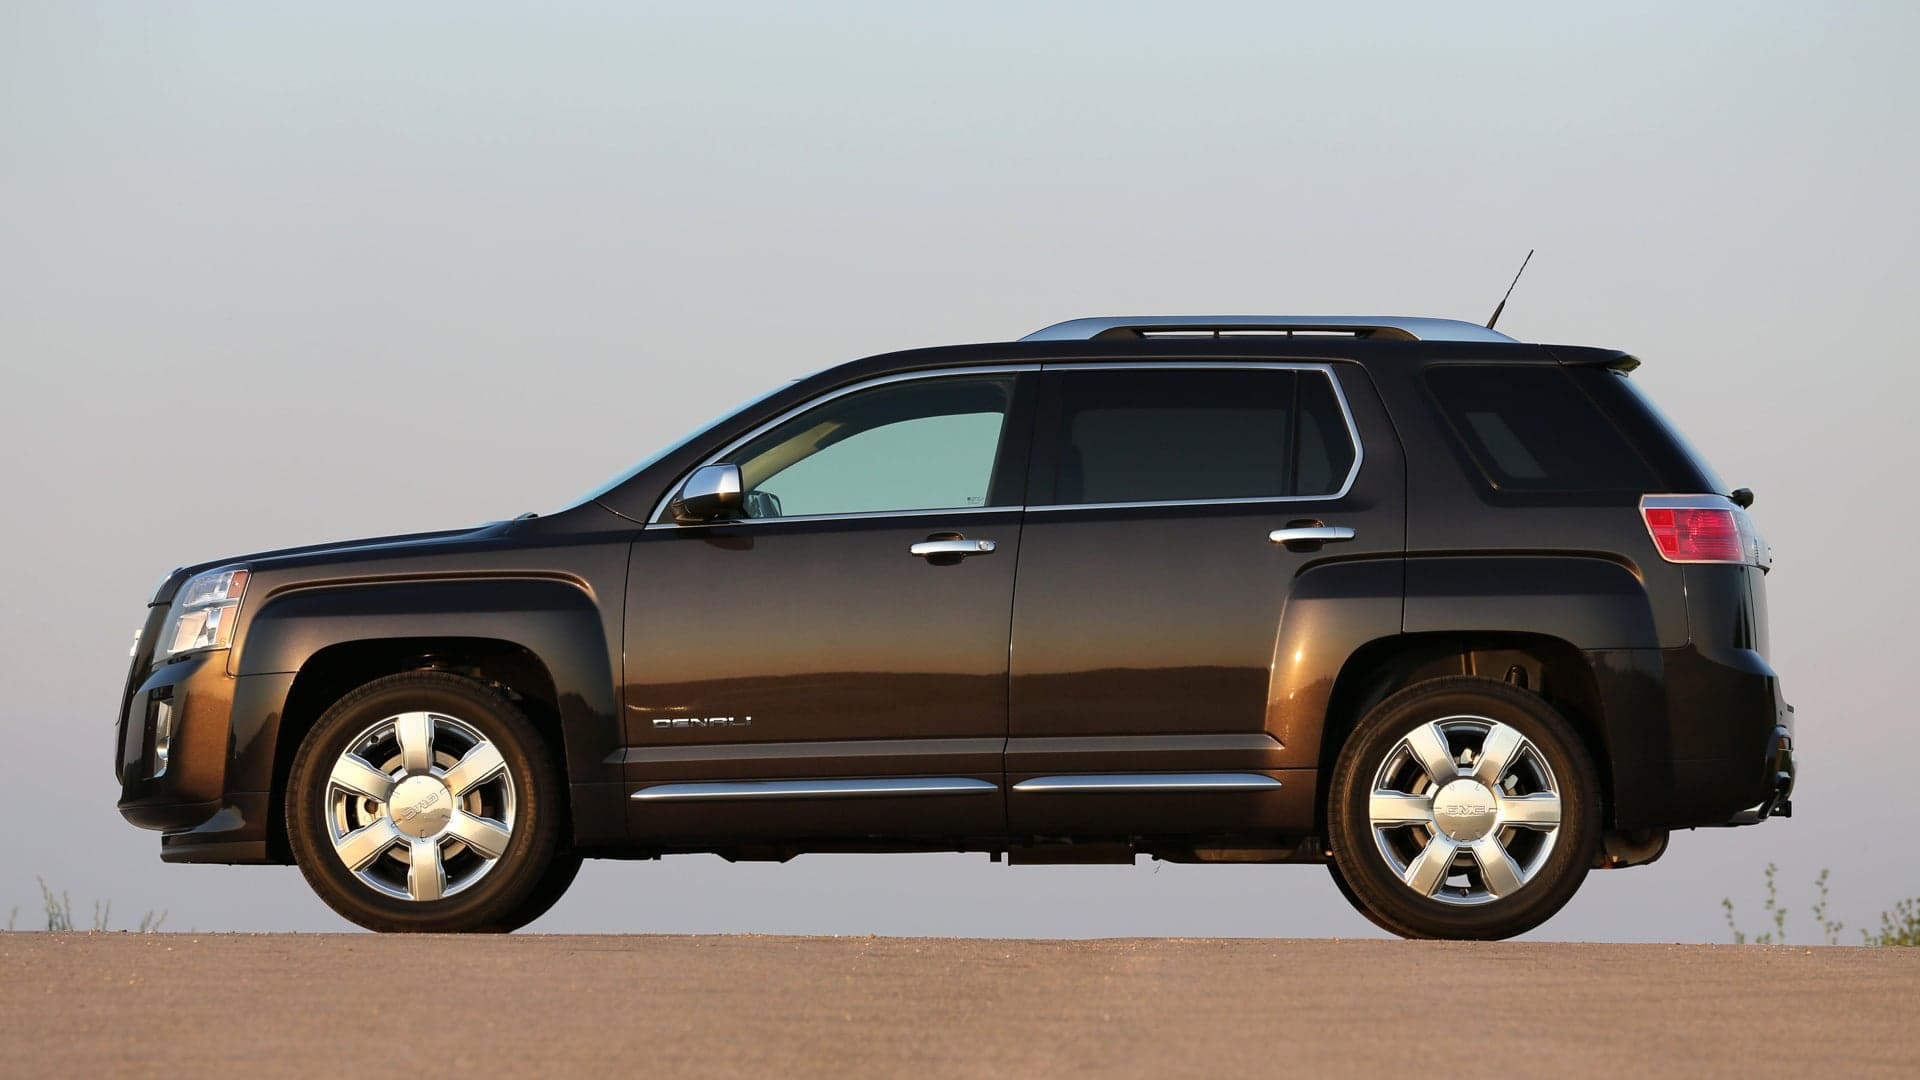 740,000 GMC Terrains Recalled for Headlights That Are Way Too Bright